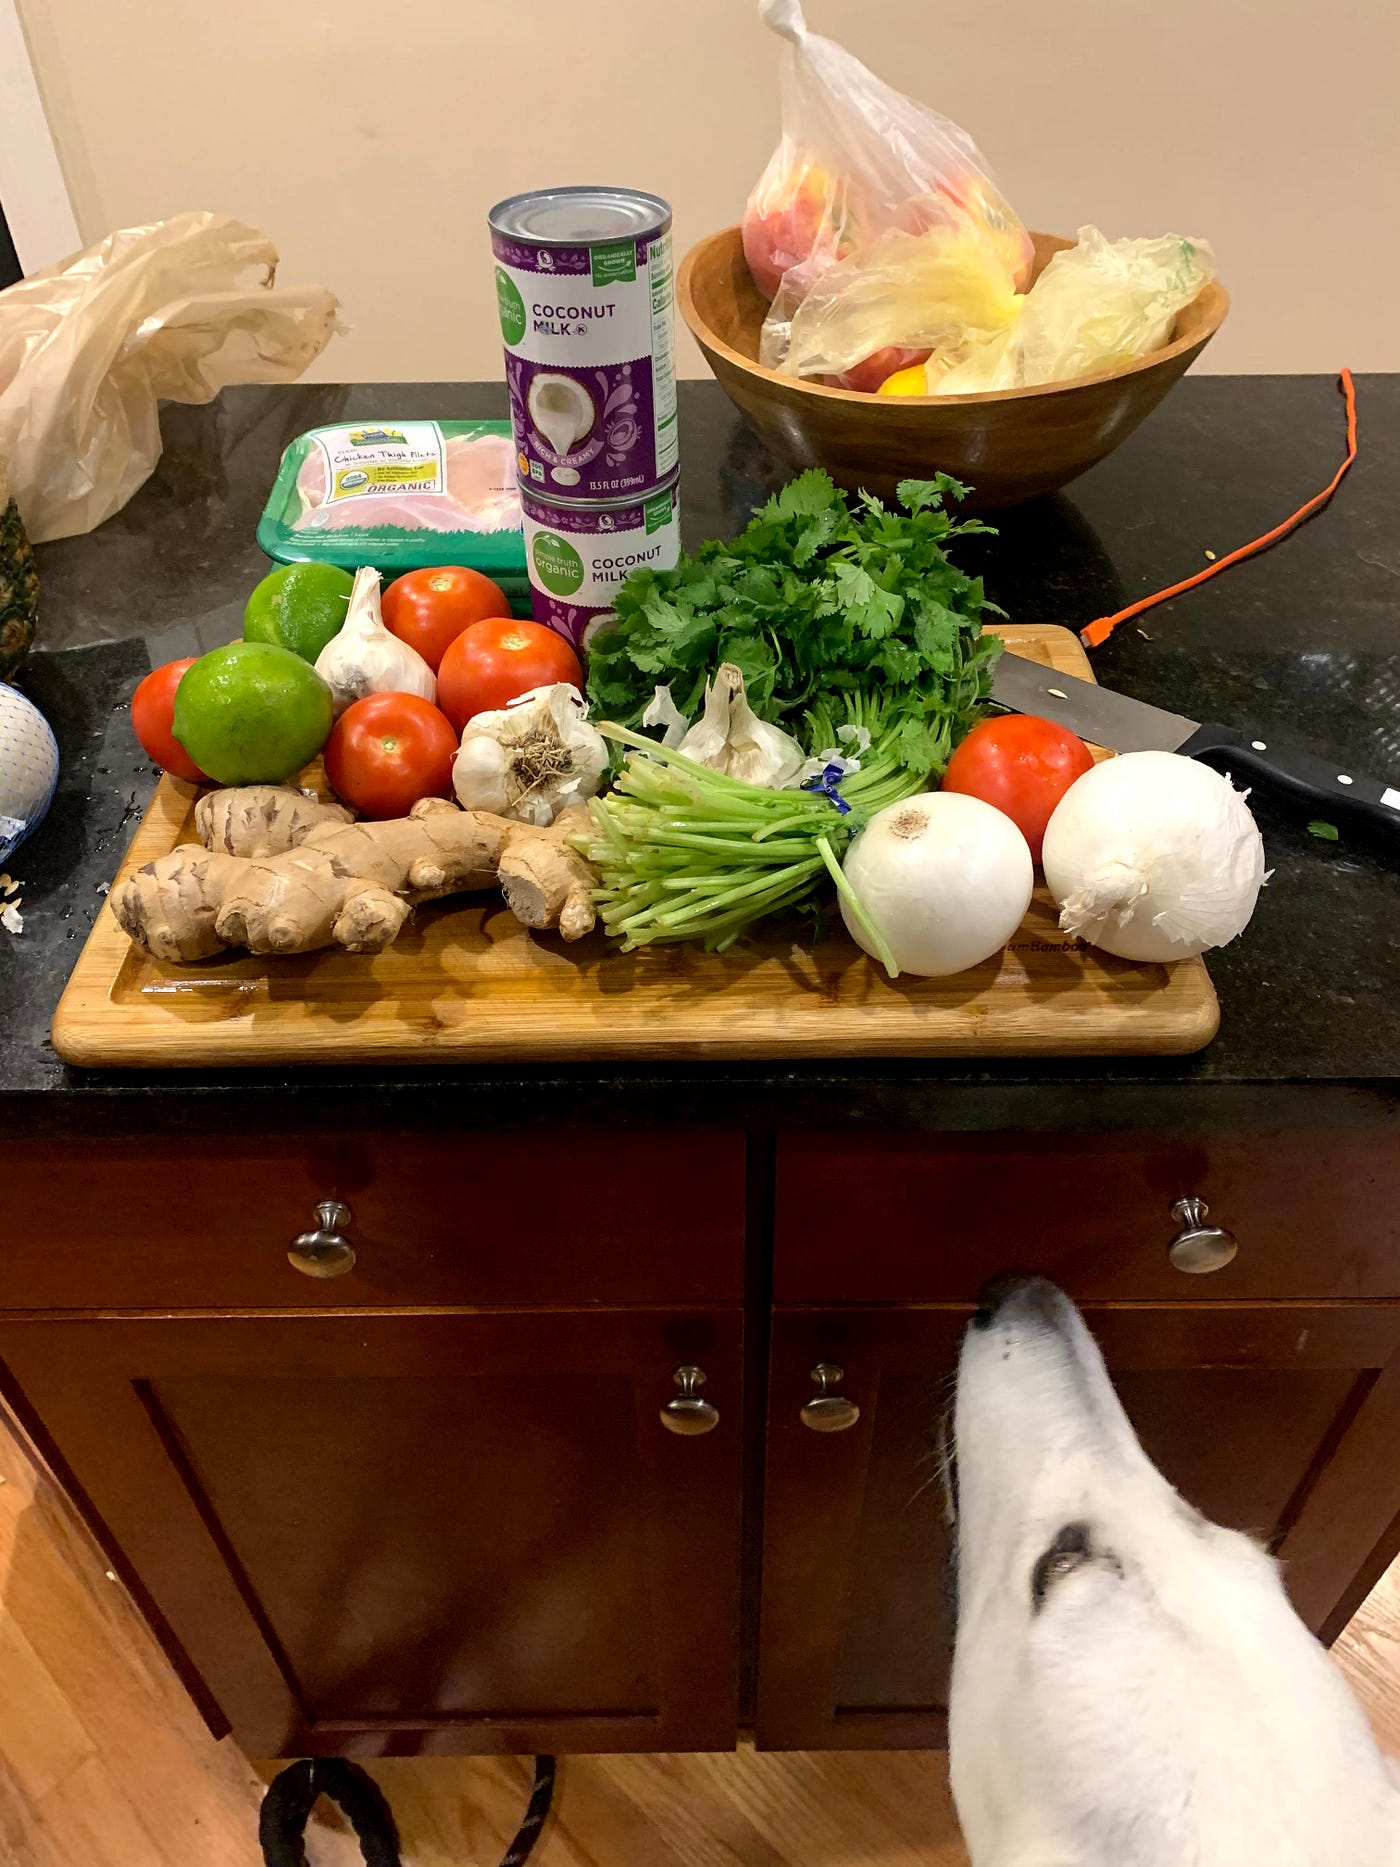 Ingredients for the meal